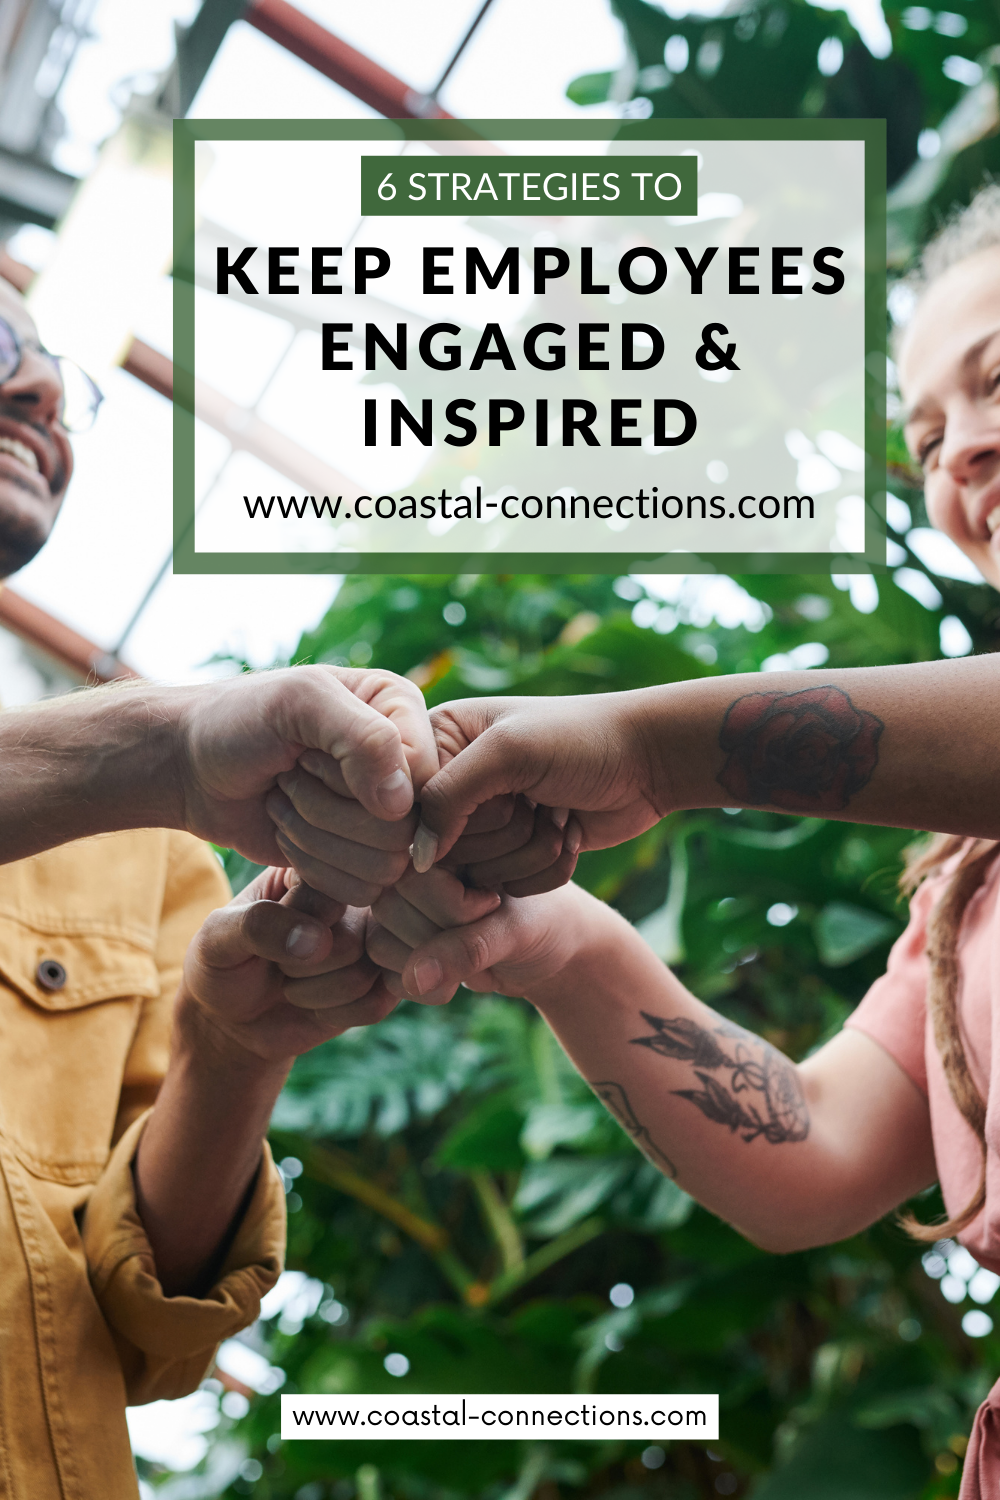 6 Strategies to Keep Employees Engaged and Inspired